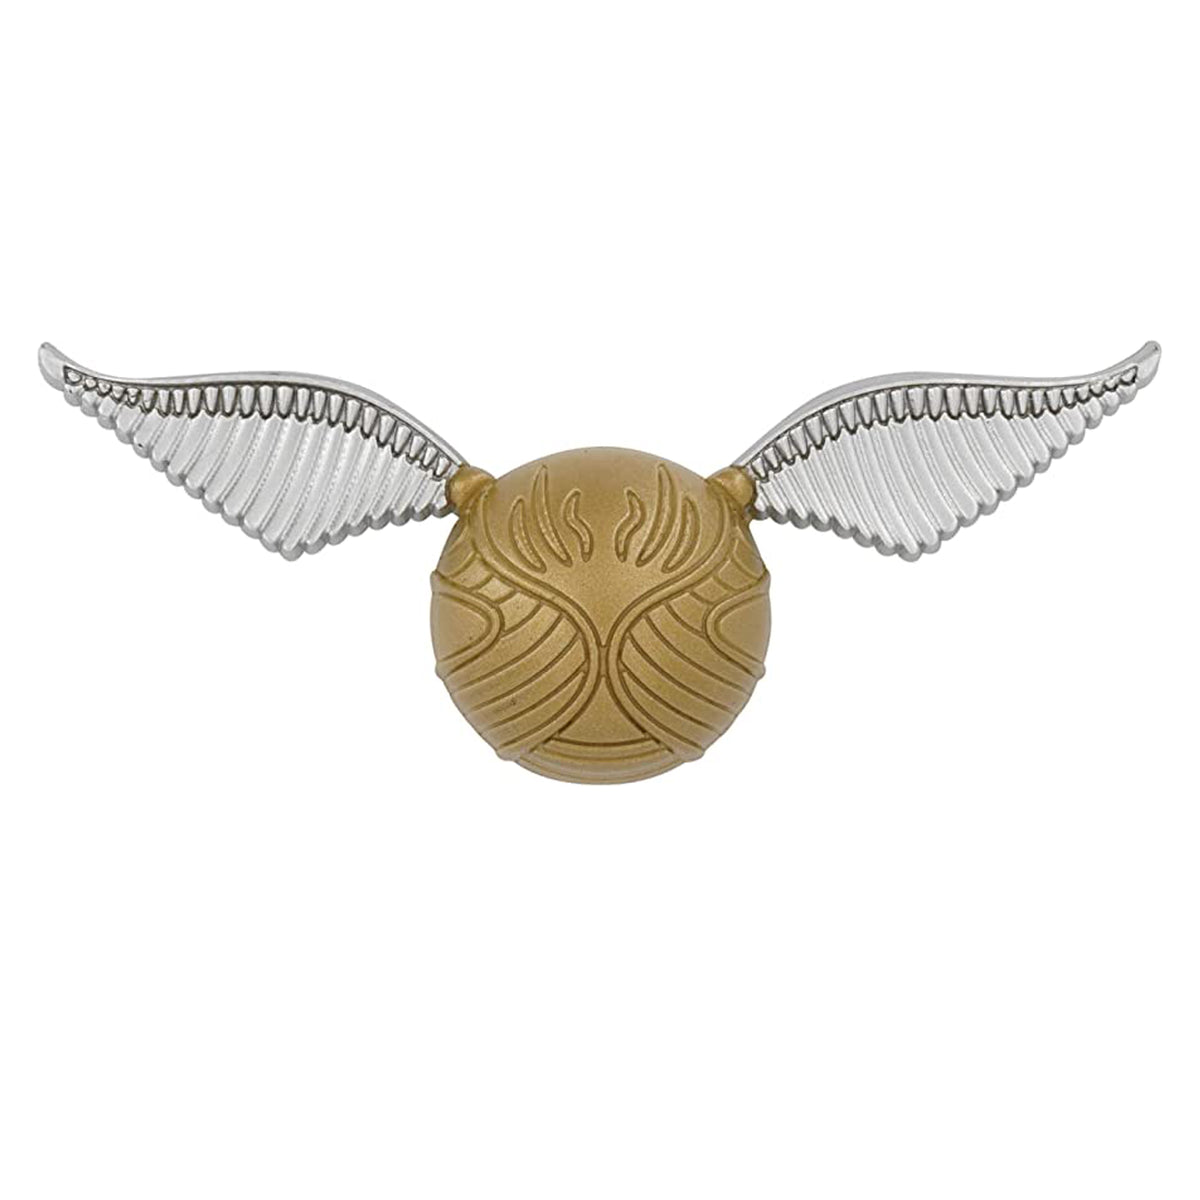 Harry Potter Golden Snitch Collectible 3D Foam Magnet